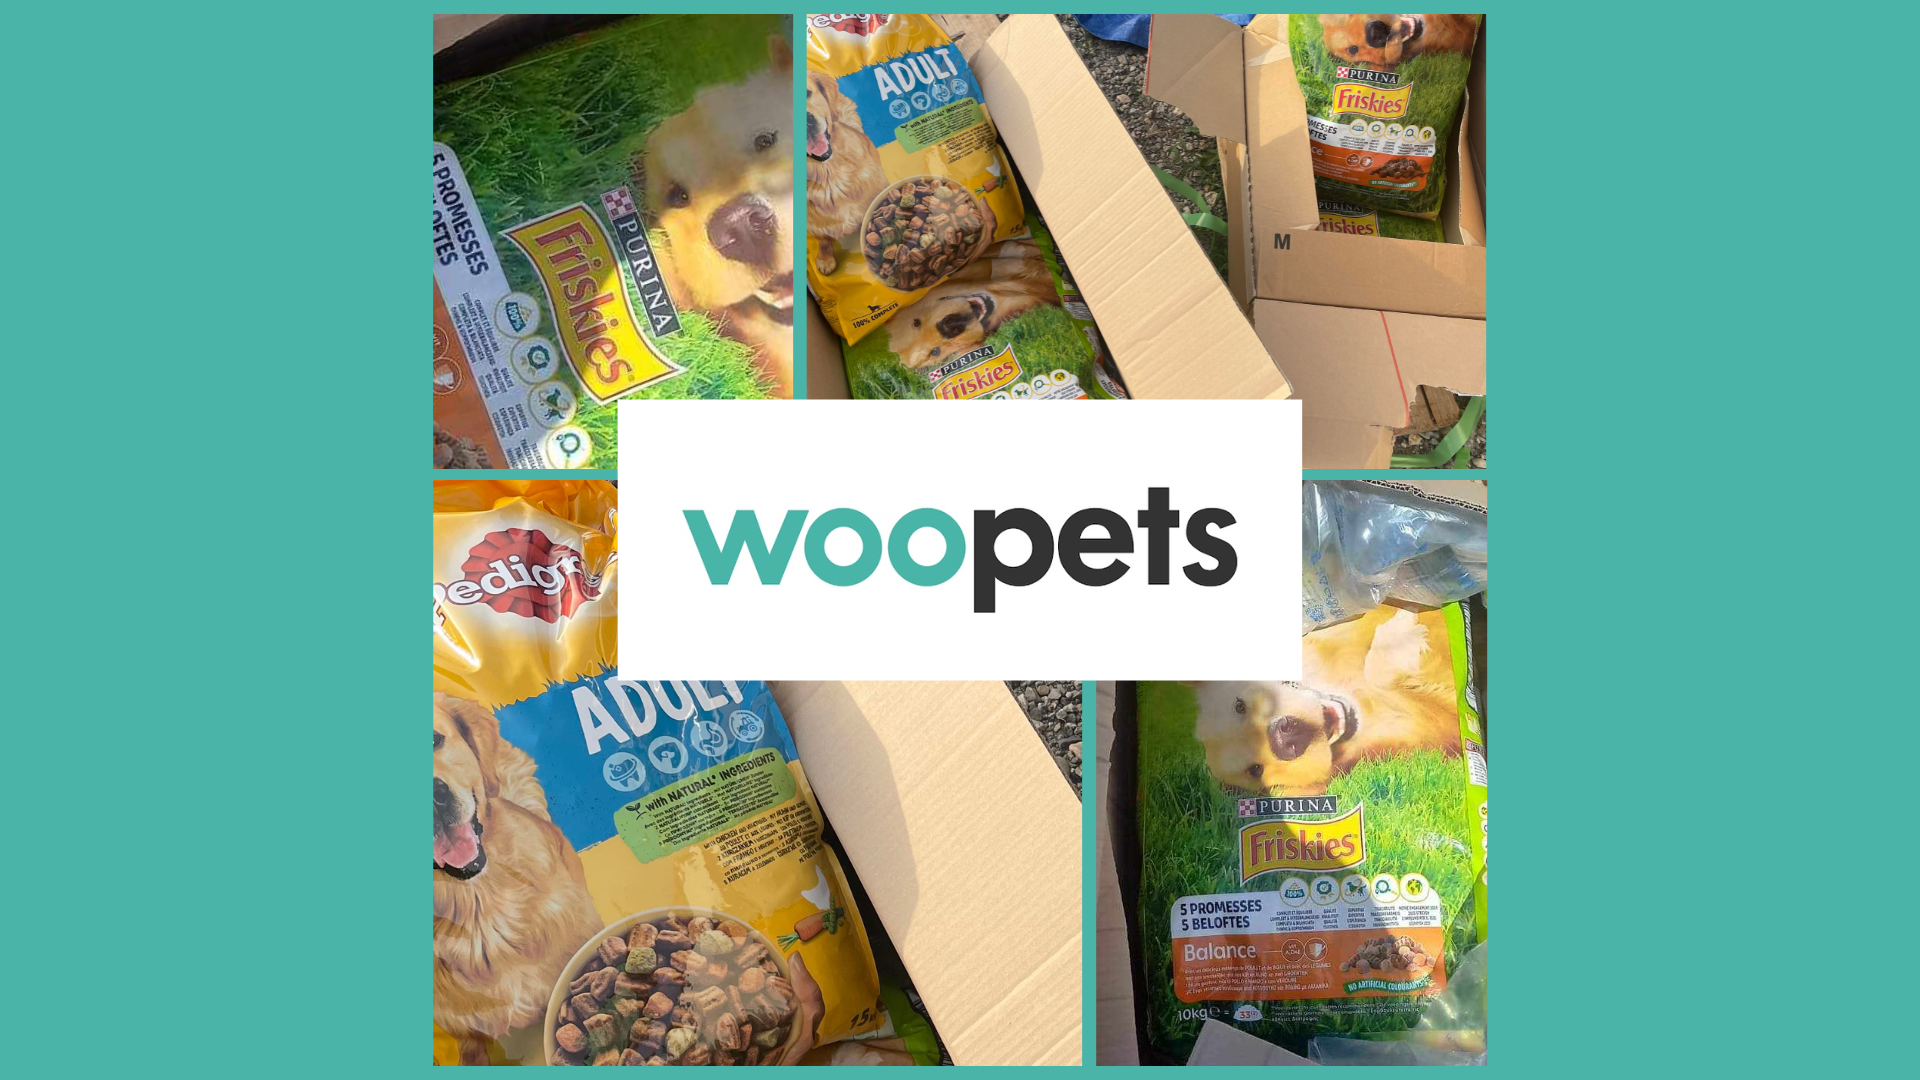 WOOPETS AIDE LES ASSOCIATIONS